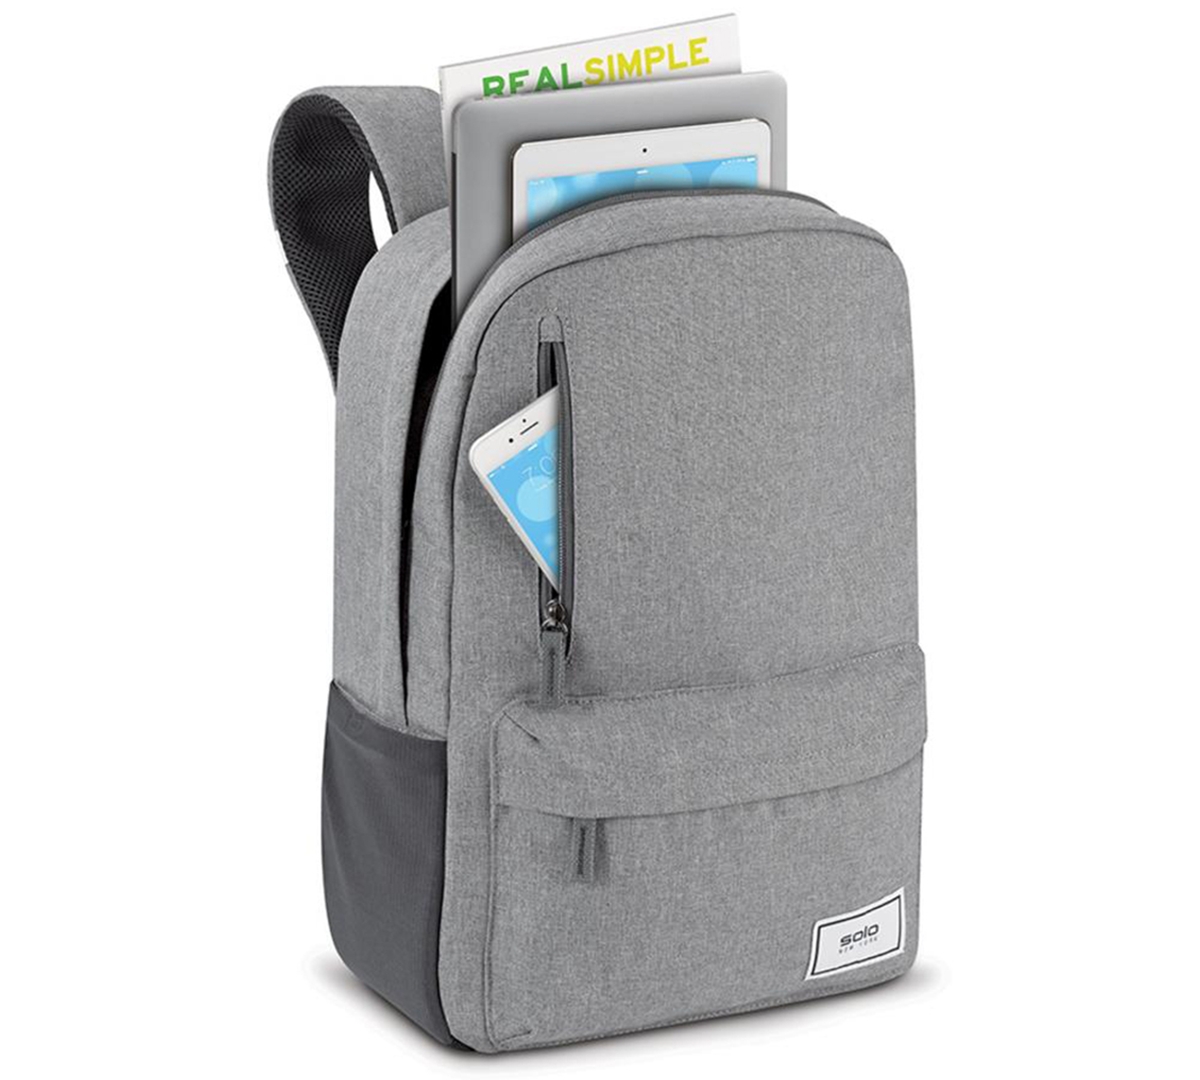 Shop Solo New York Re:cover Backpack In Gray